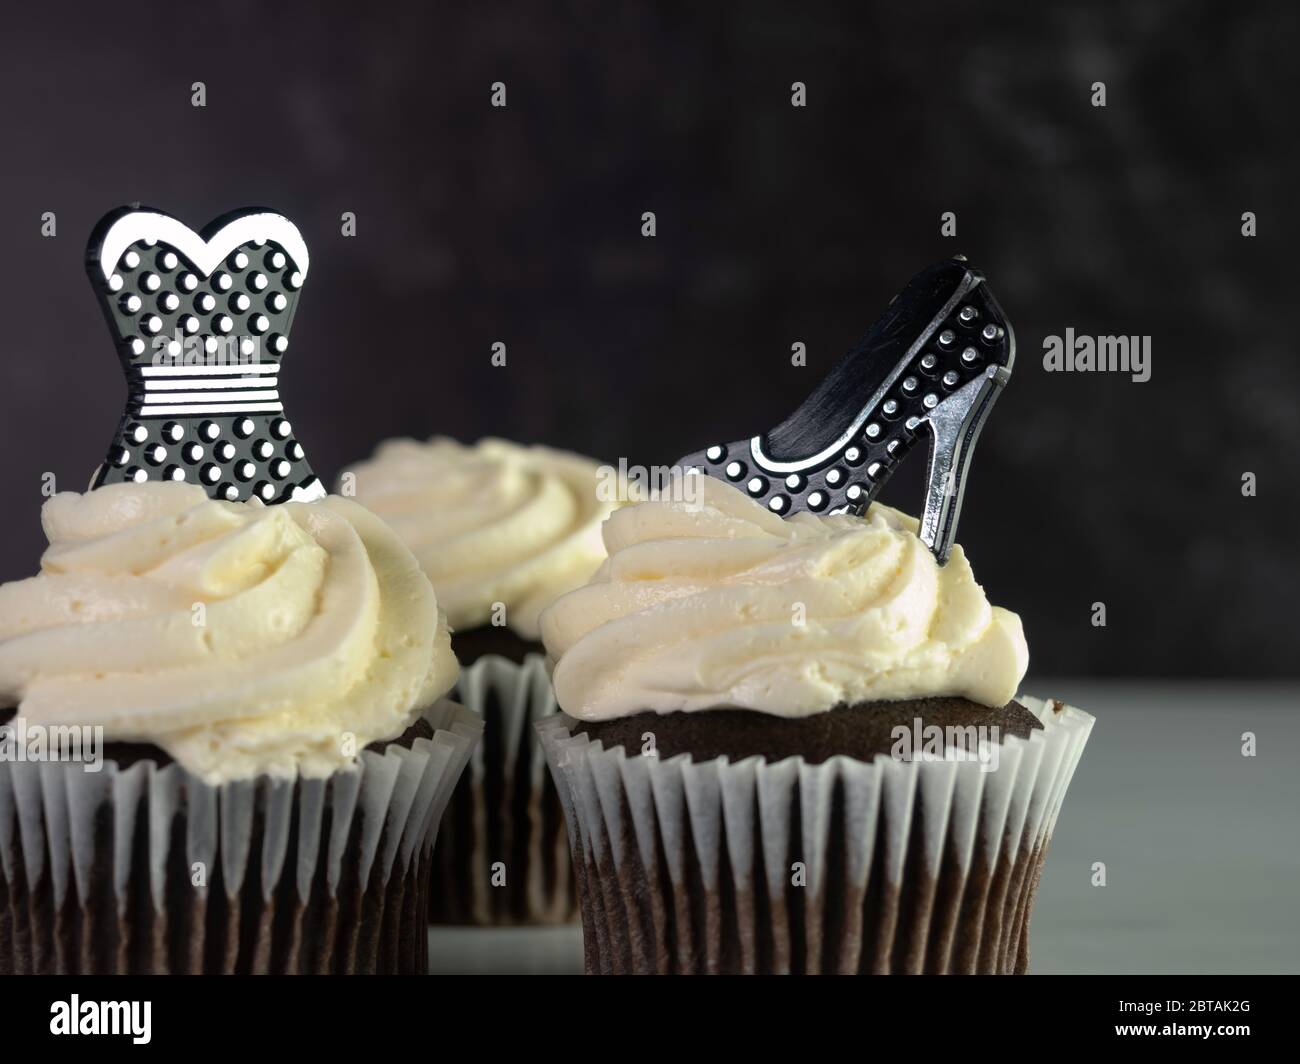 Chocolate cupcakes with white swirled frosting decorated with a black and silver polka dot dress and high heel shoe perfect for the prom, wedding, or Stock Photo